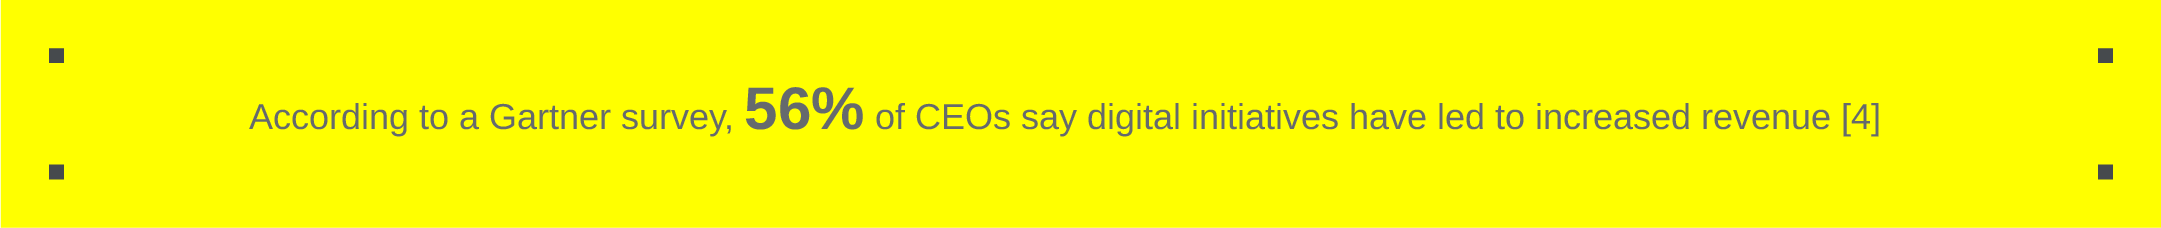 According to a Gartner survey, 56% of CEOs say digital initiatives have led to increased revenue [4]